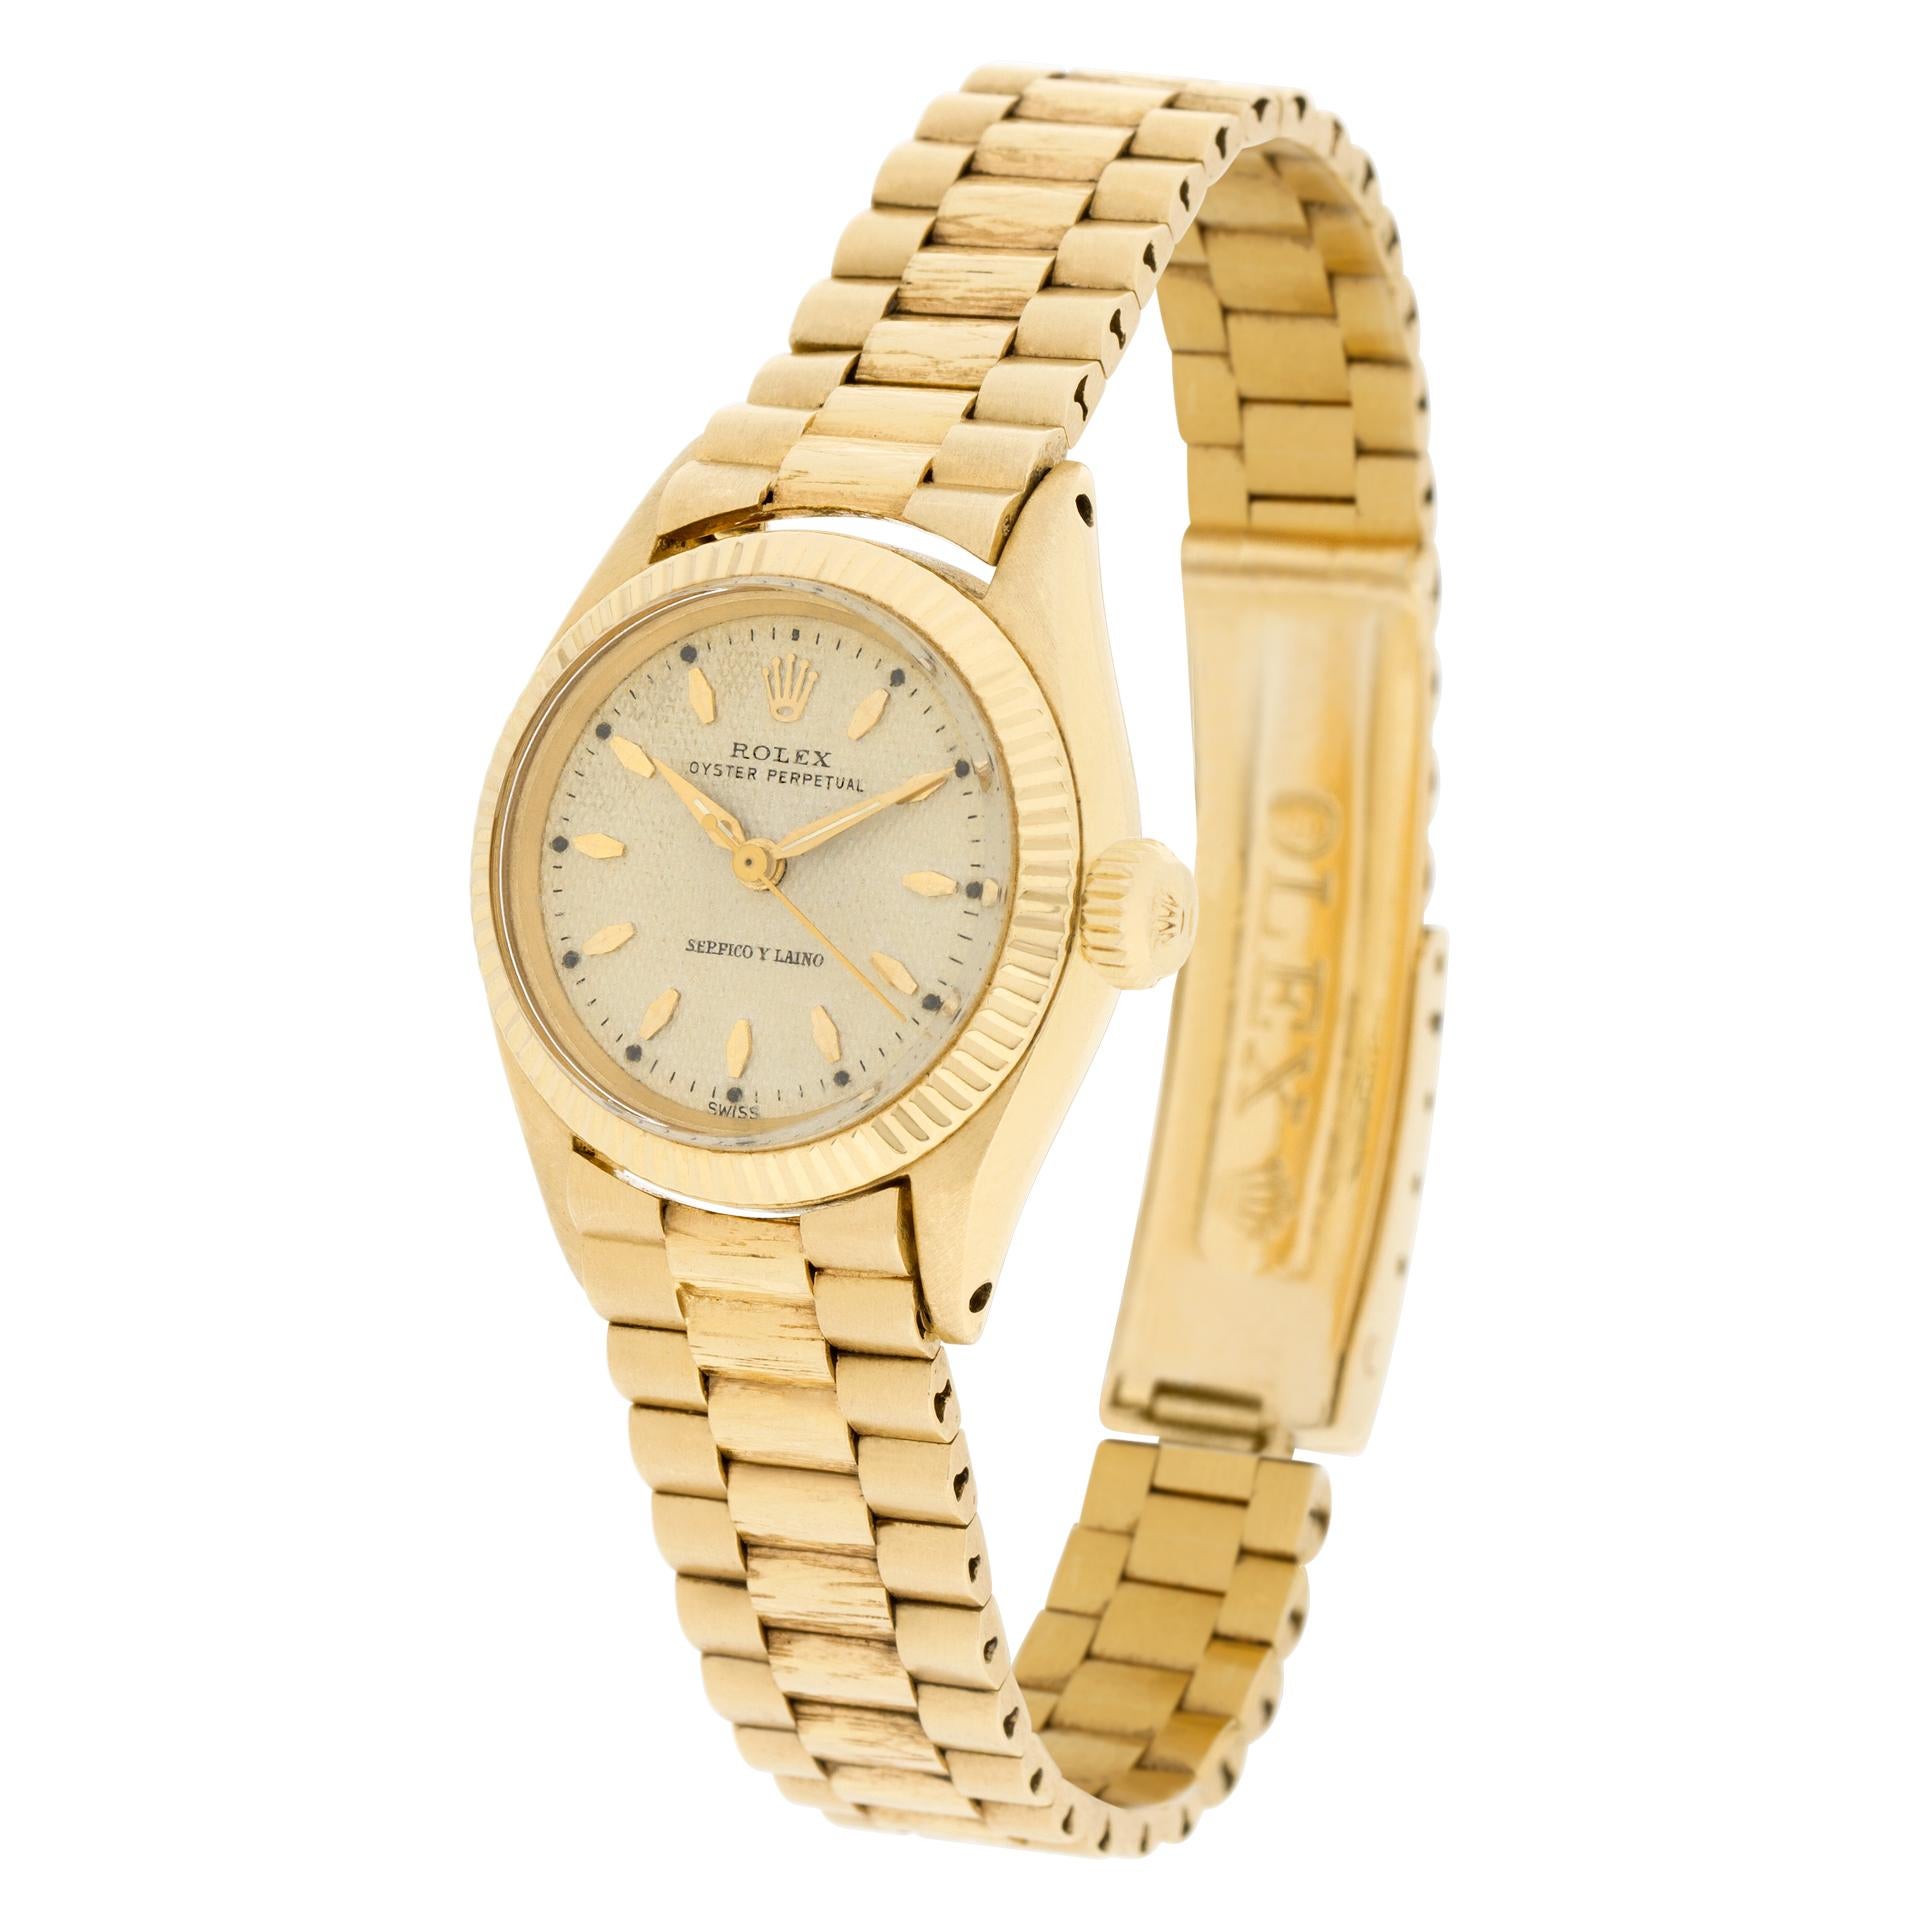 Vintage Rolex Oyster Perpetual in 18k yellow gold on a DA Venezuela Rolex authorized bark finish president bracelet. Automatic. Circa 1960. 25 mm case size. Ref 6619. Fine Pre-owned Rolex Watch. Certified preowned Vintage Rolex Oyster Perpetual 6619